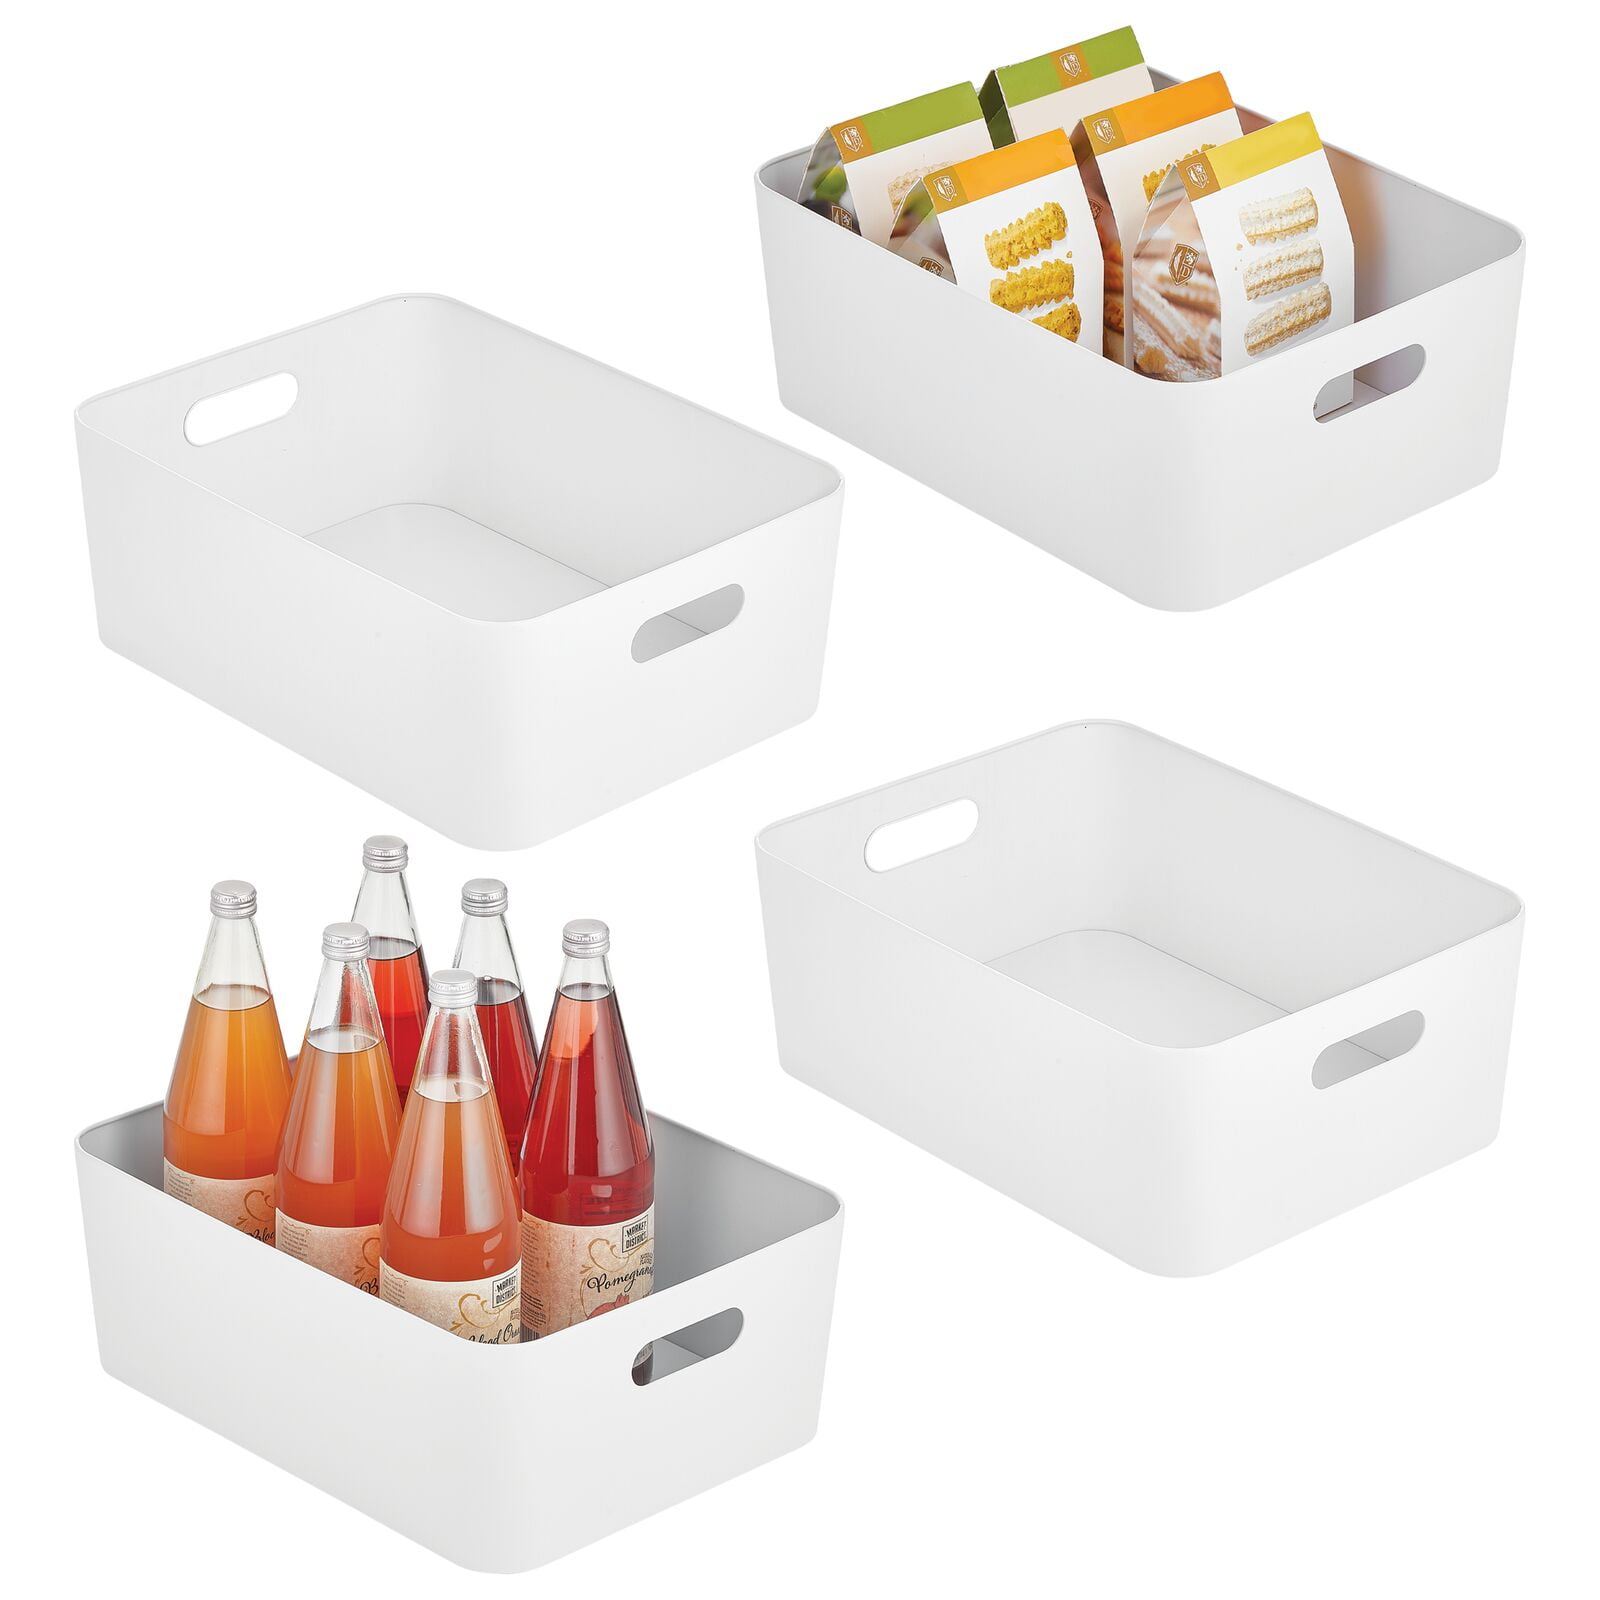 mDesign Small Metal Kitchen Storage Container Bin with Handles, 4 Pack,  White